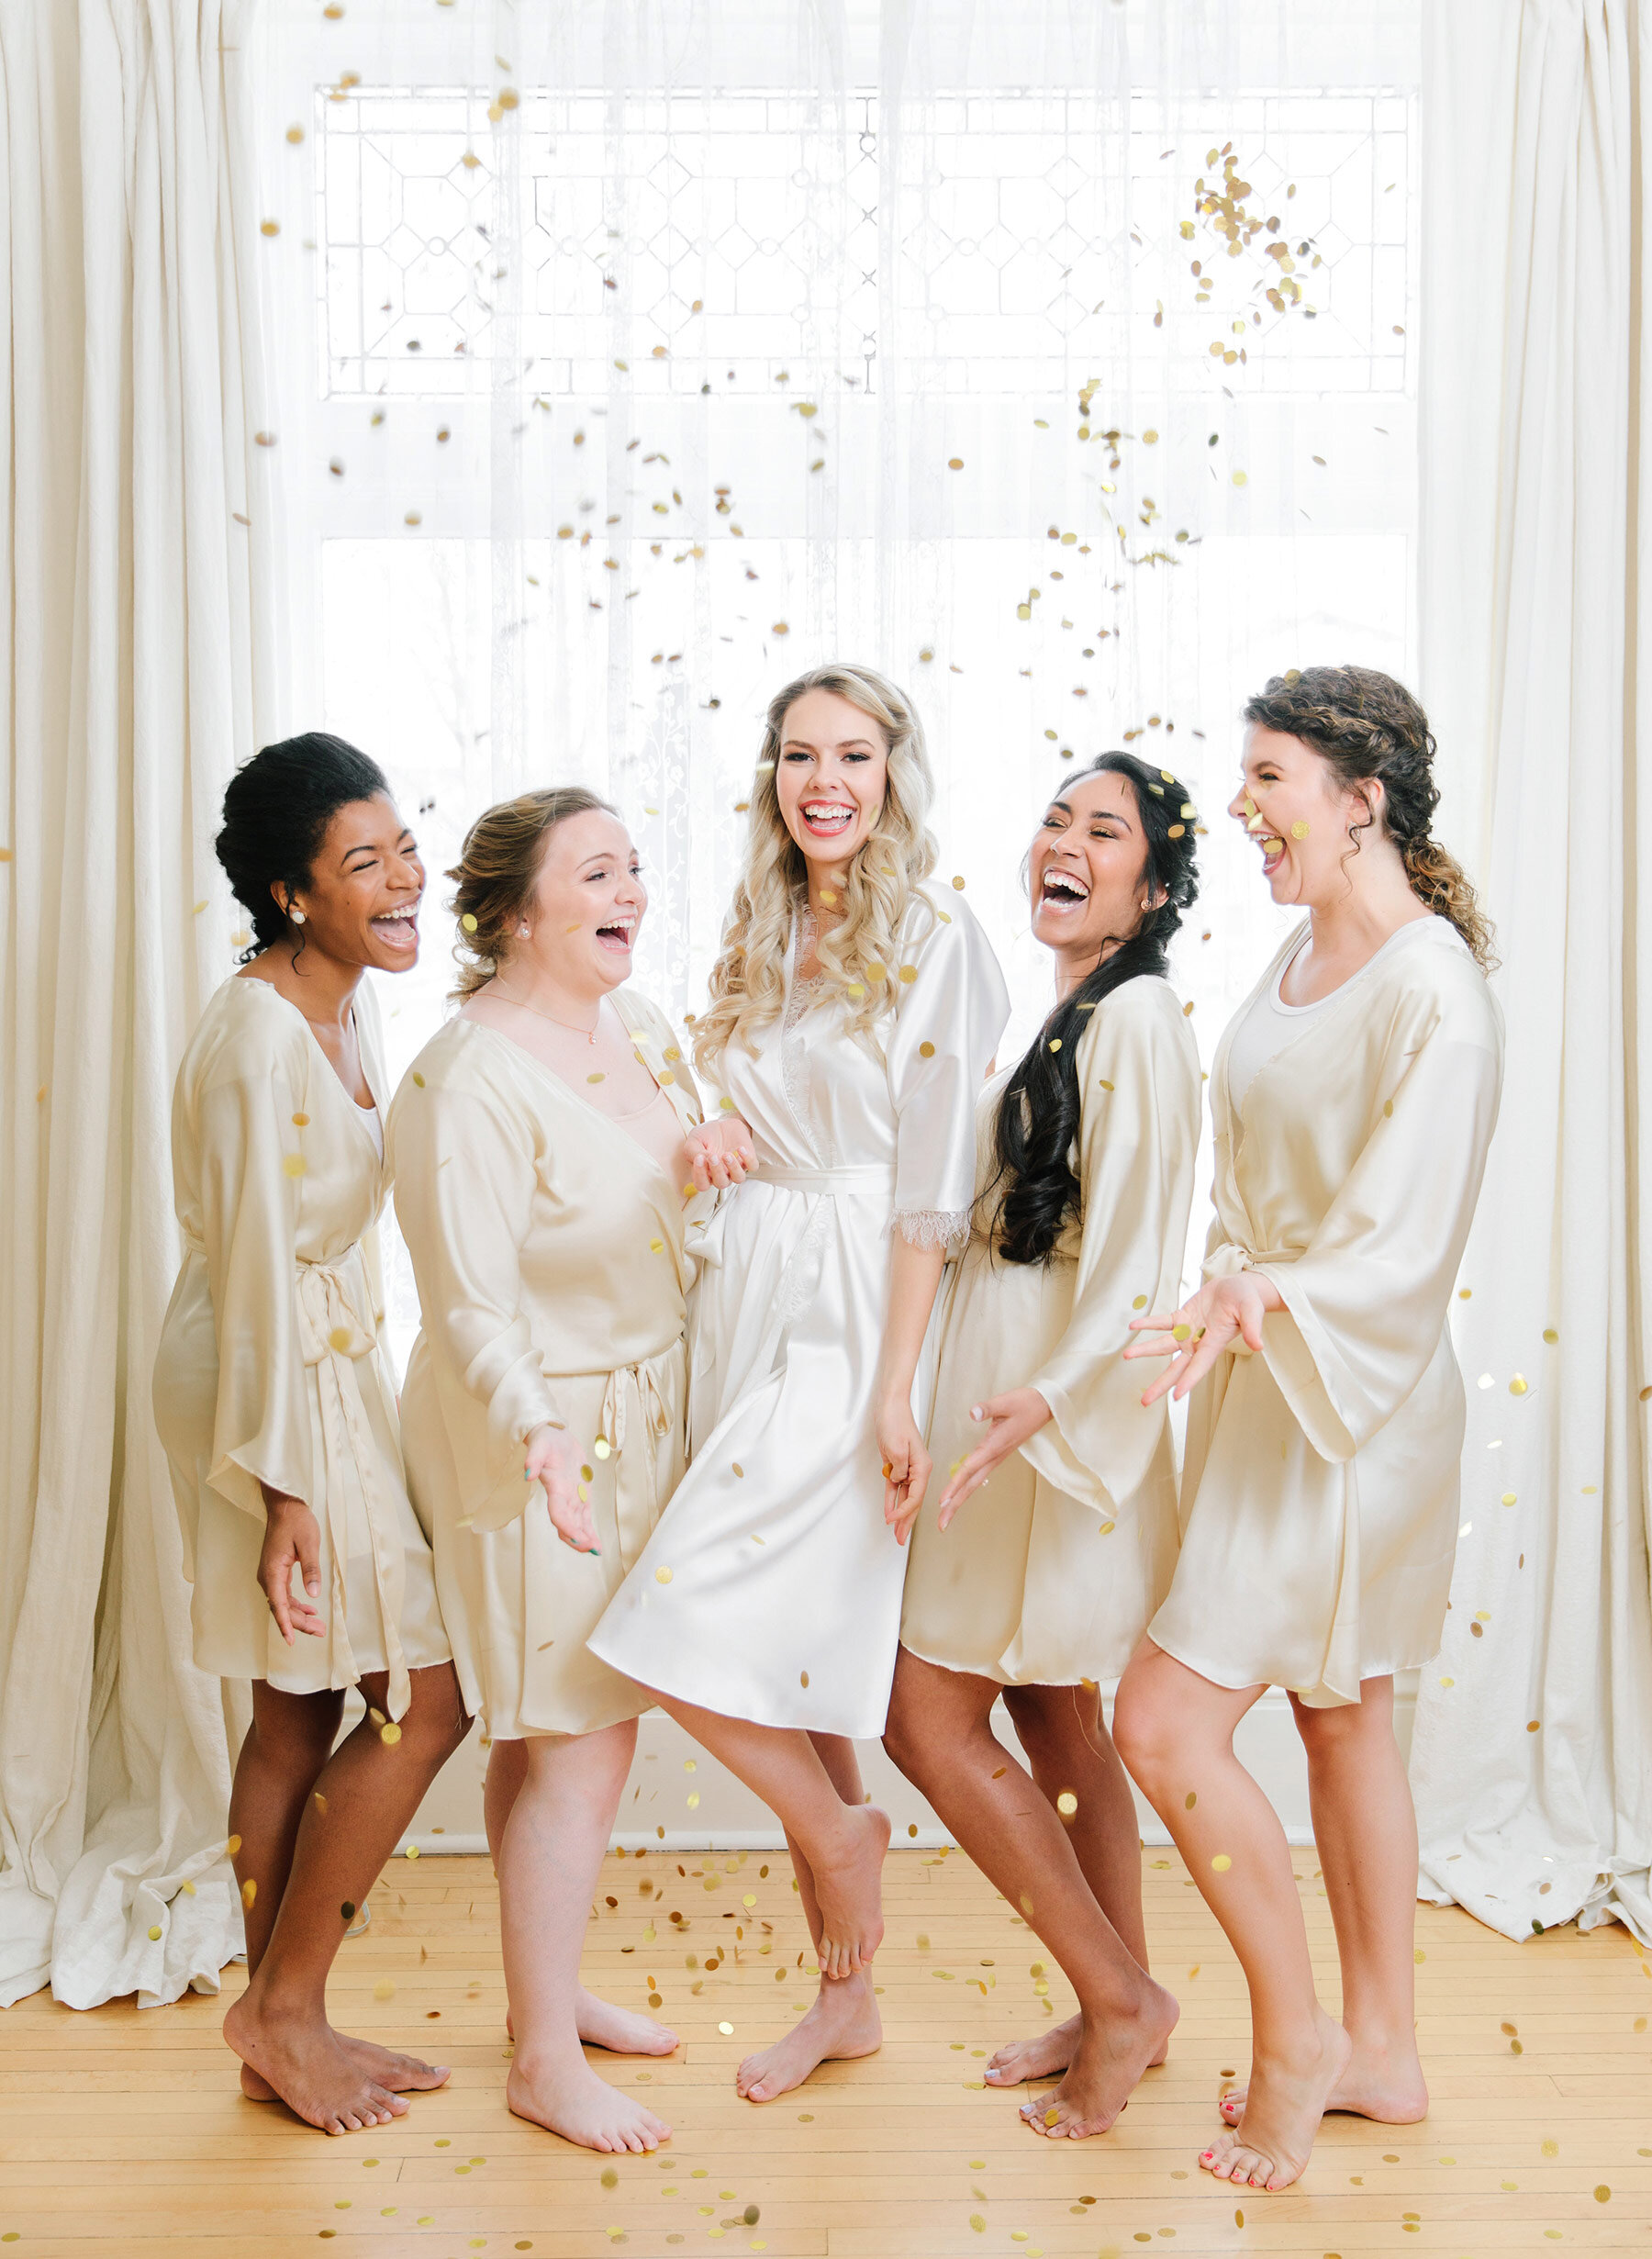  Smiling and laughing with her bridesmaids in their ivory silk wedding robes, Salt Lake City, UT photographer, Clarity Lane captures this bride tossing confetti on her wedding morning. wedding morning bride with bridesmaids wedding party silk robes S